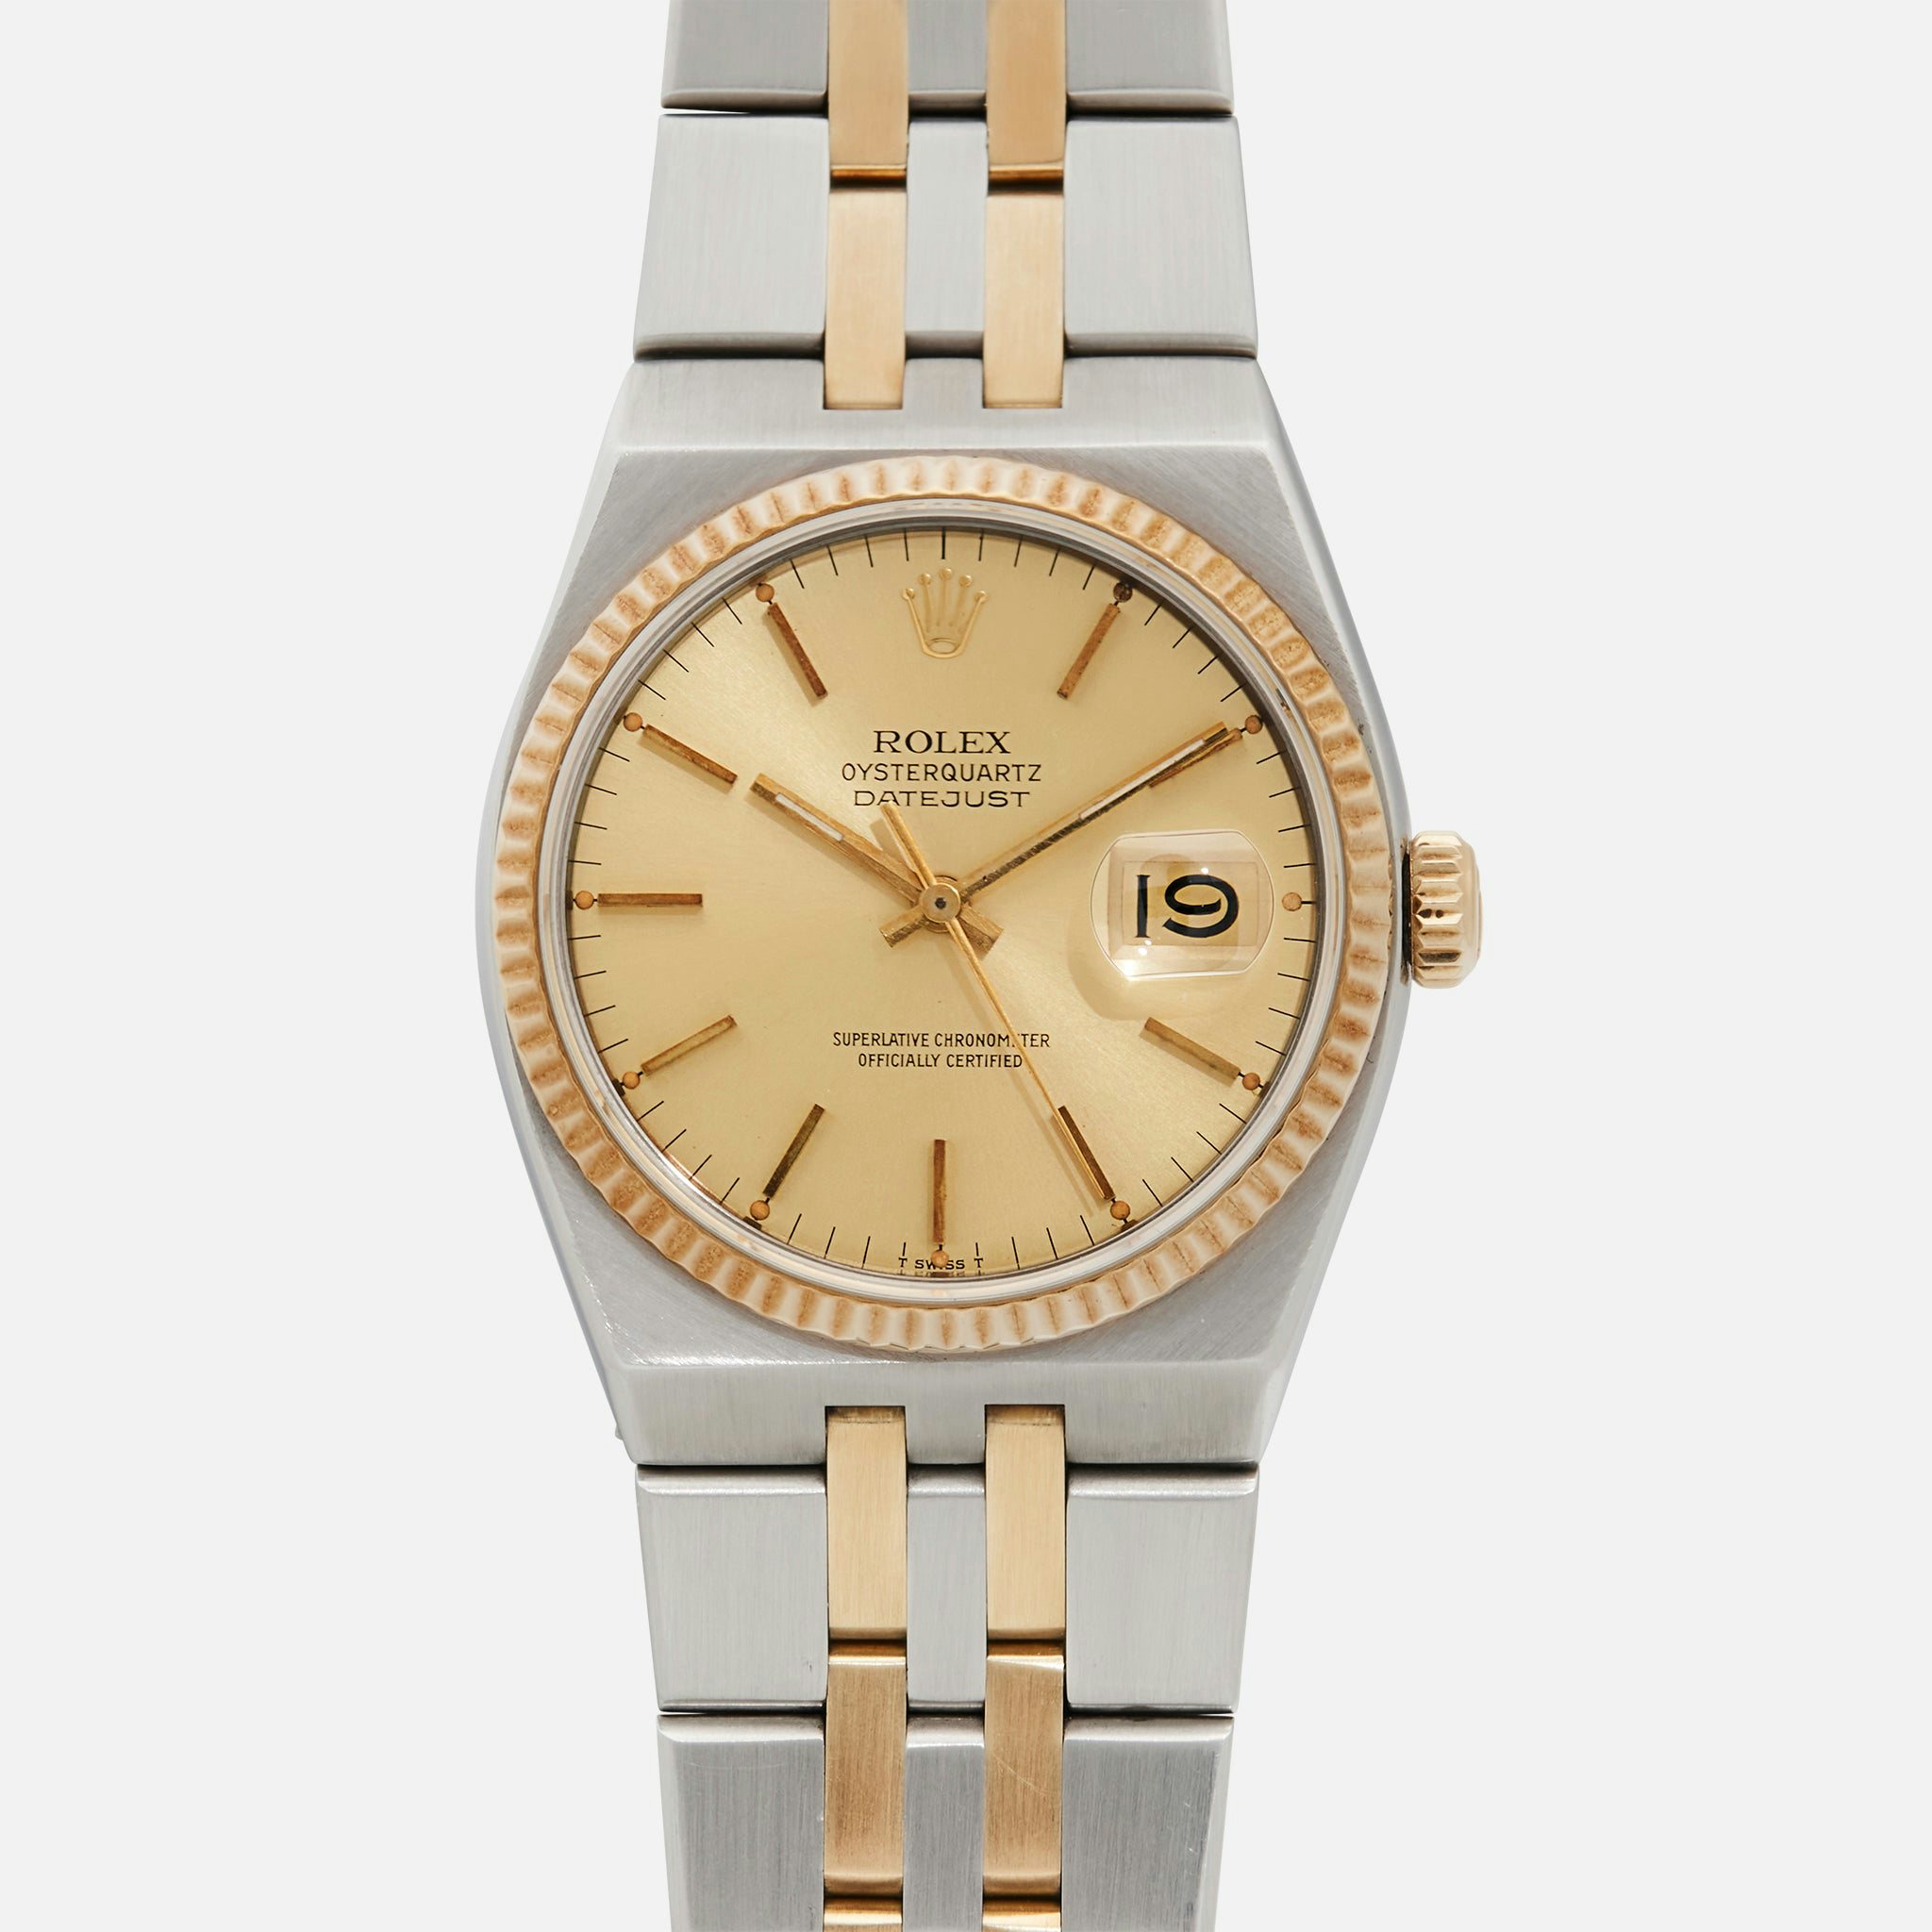 Metafor kig ind reference 1979 Rolex Datejust Oysterquartz Ref. 17013 In Two-Tone With Full Set -  HODINKEE Shop